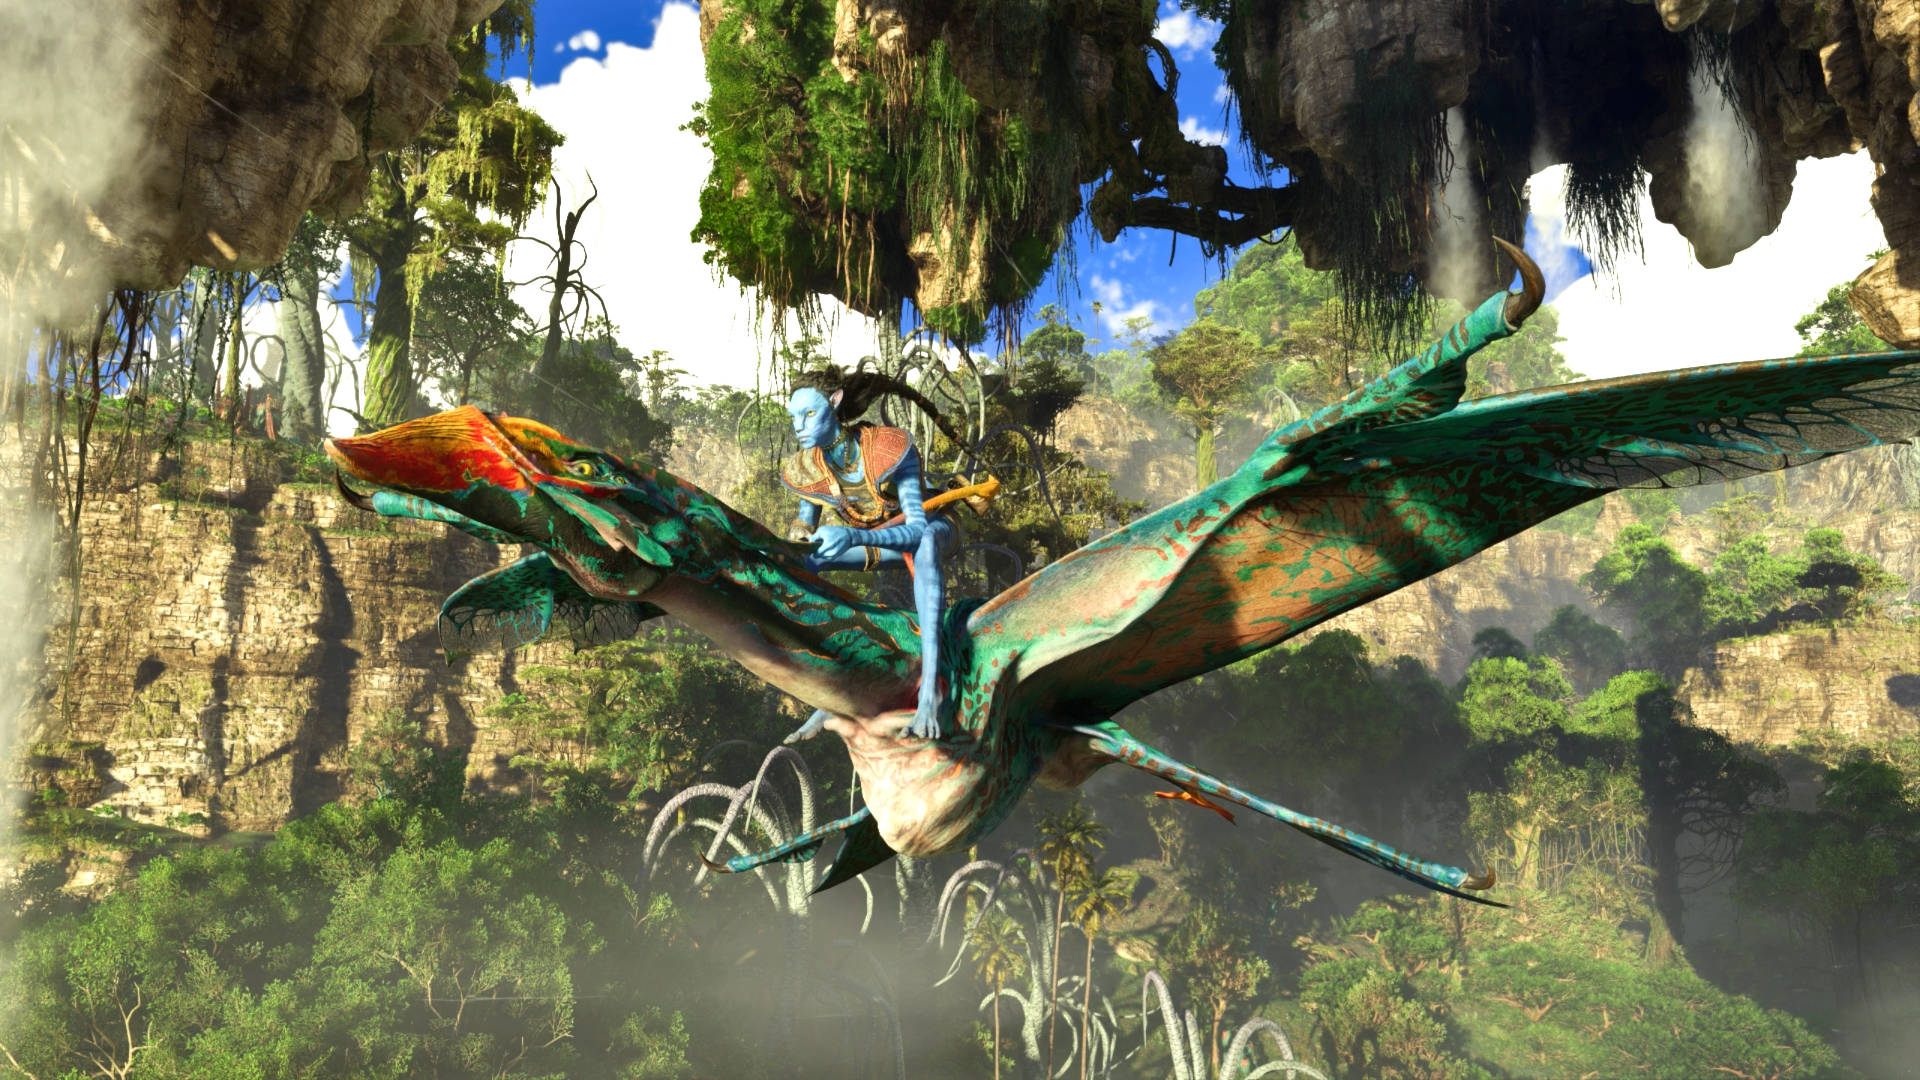 Avatar Frontiers of Pandora could be the best Far Cry in years